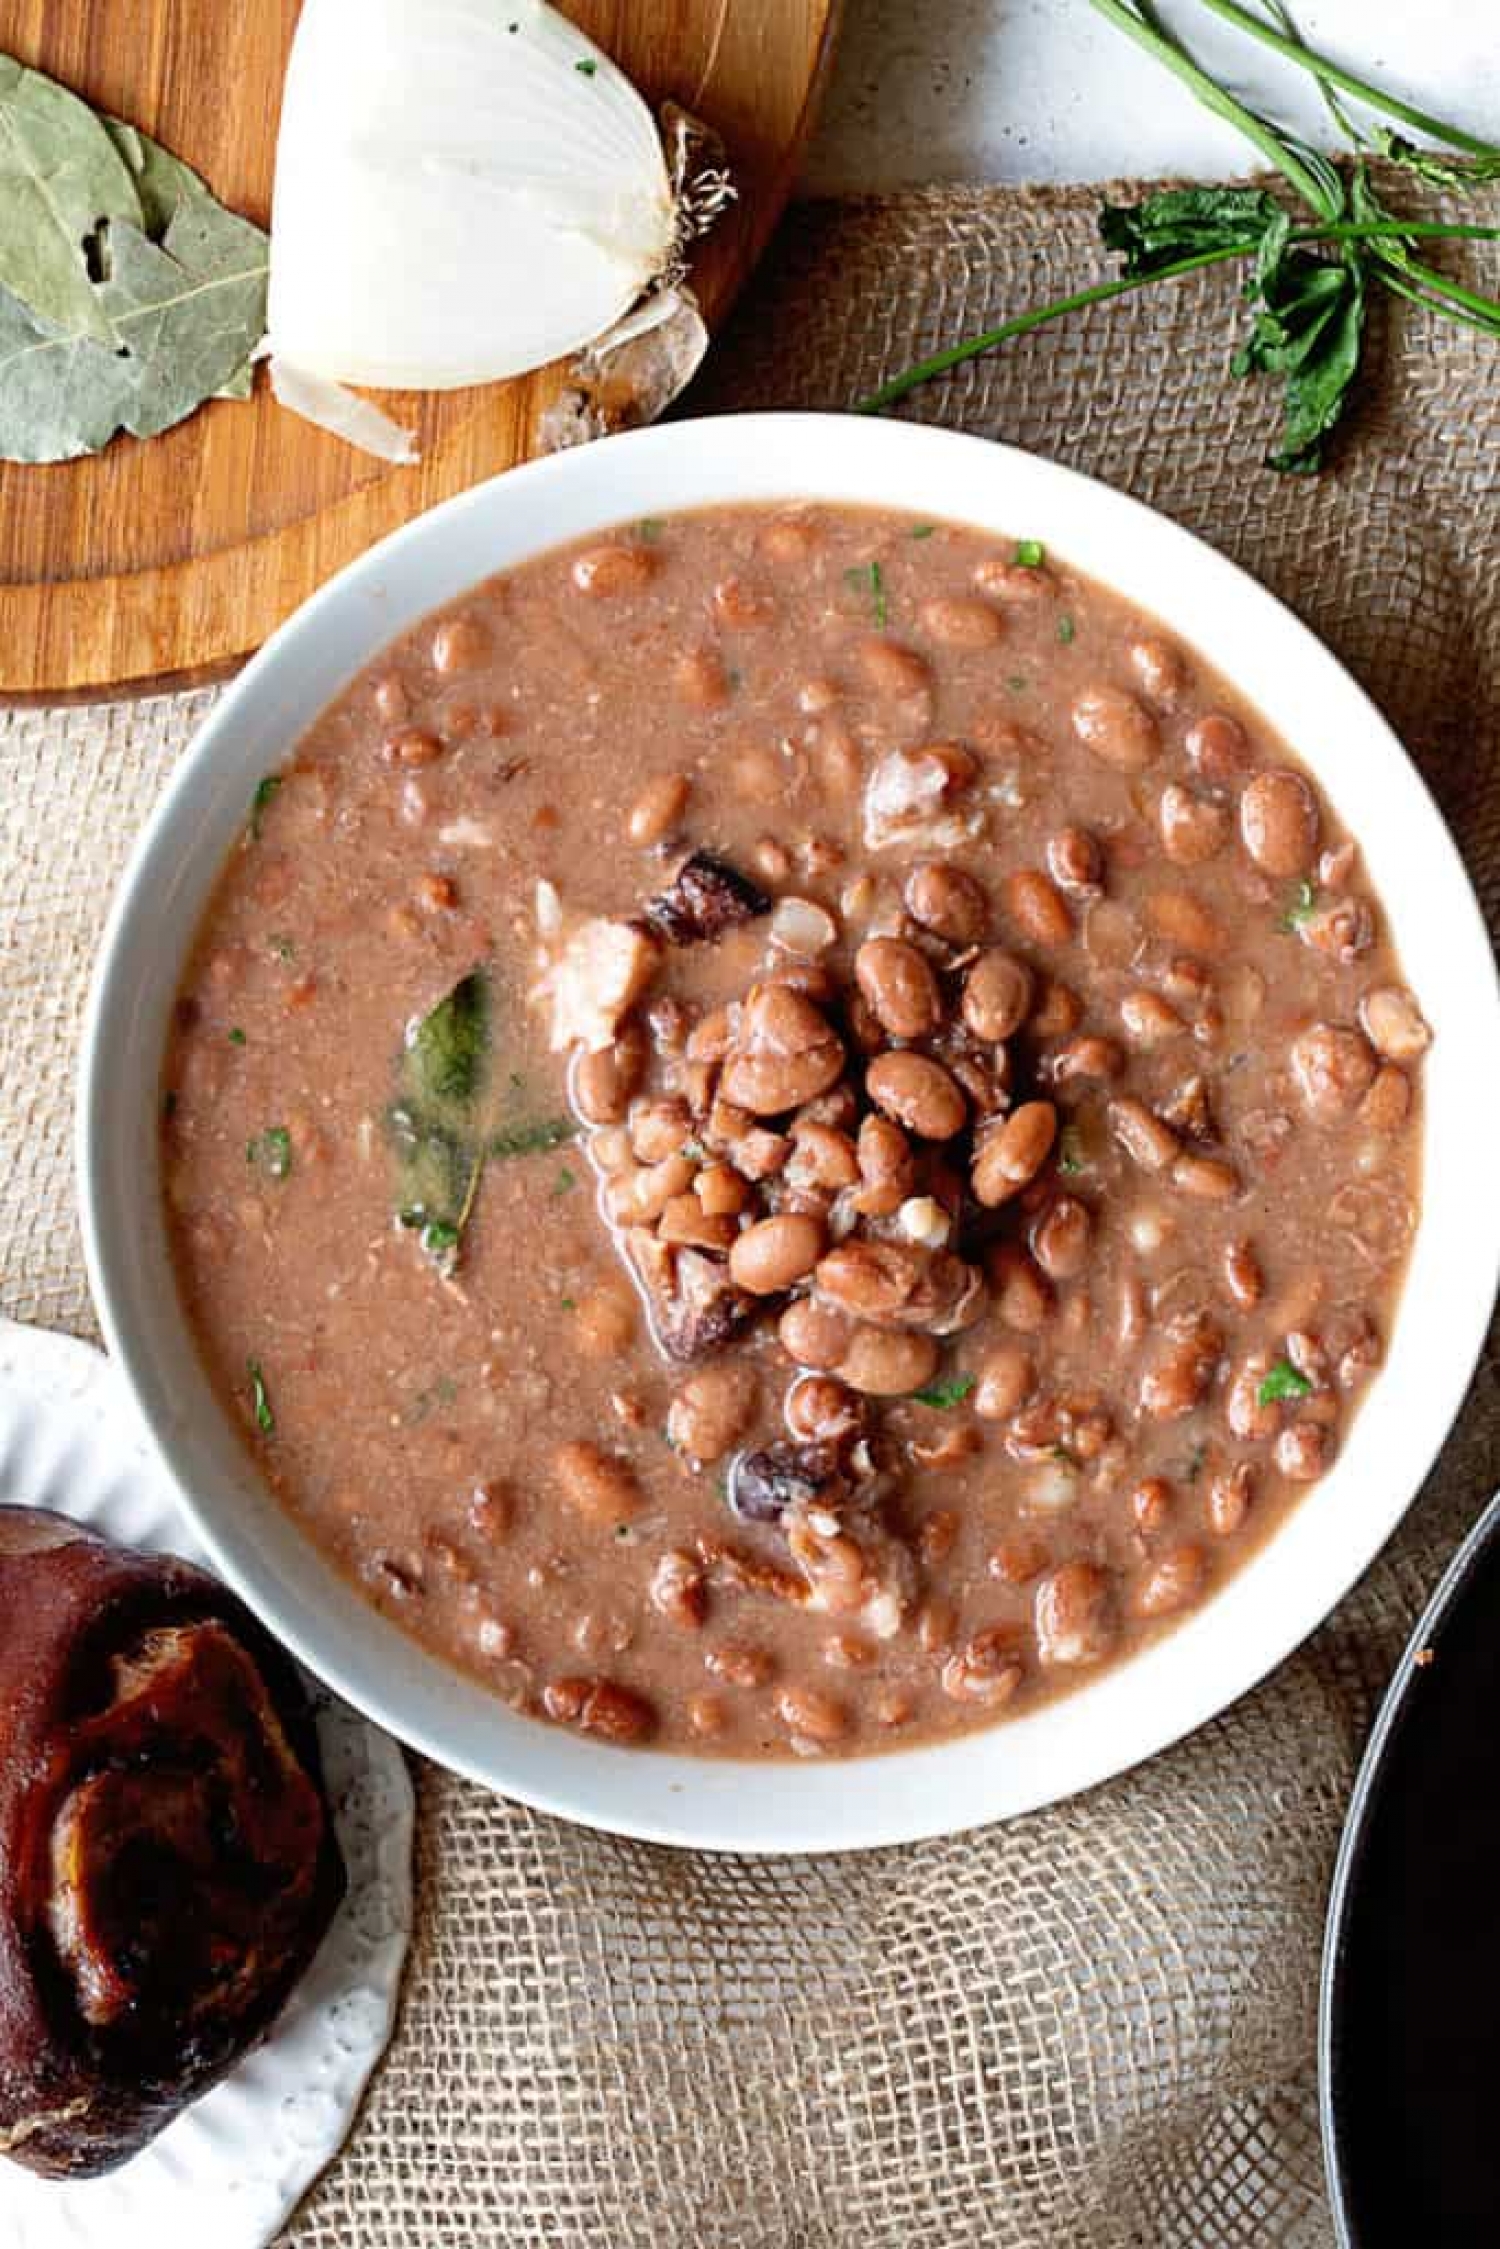 <p>Get your Southern comfort on, with <a href="https://grandbaby-cakes.com/pinto-beans/" rel="noopener">this hearty recipe</a> for pinto beans, simmered up with budget-friendly ham hocks and a few simple seasonings. Make sure you soak the pinto beans overnight so they're plumped and ready to cook!</p>